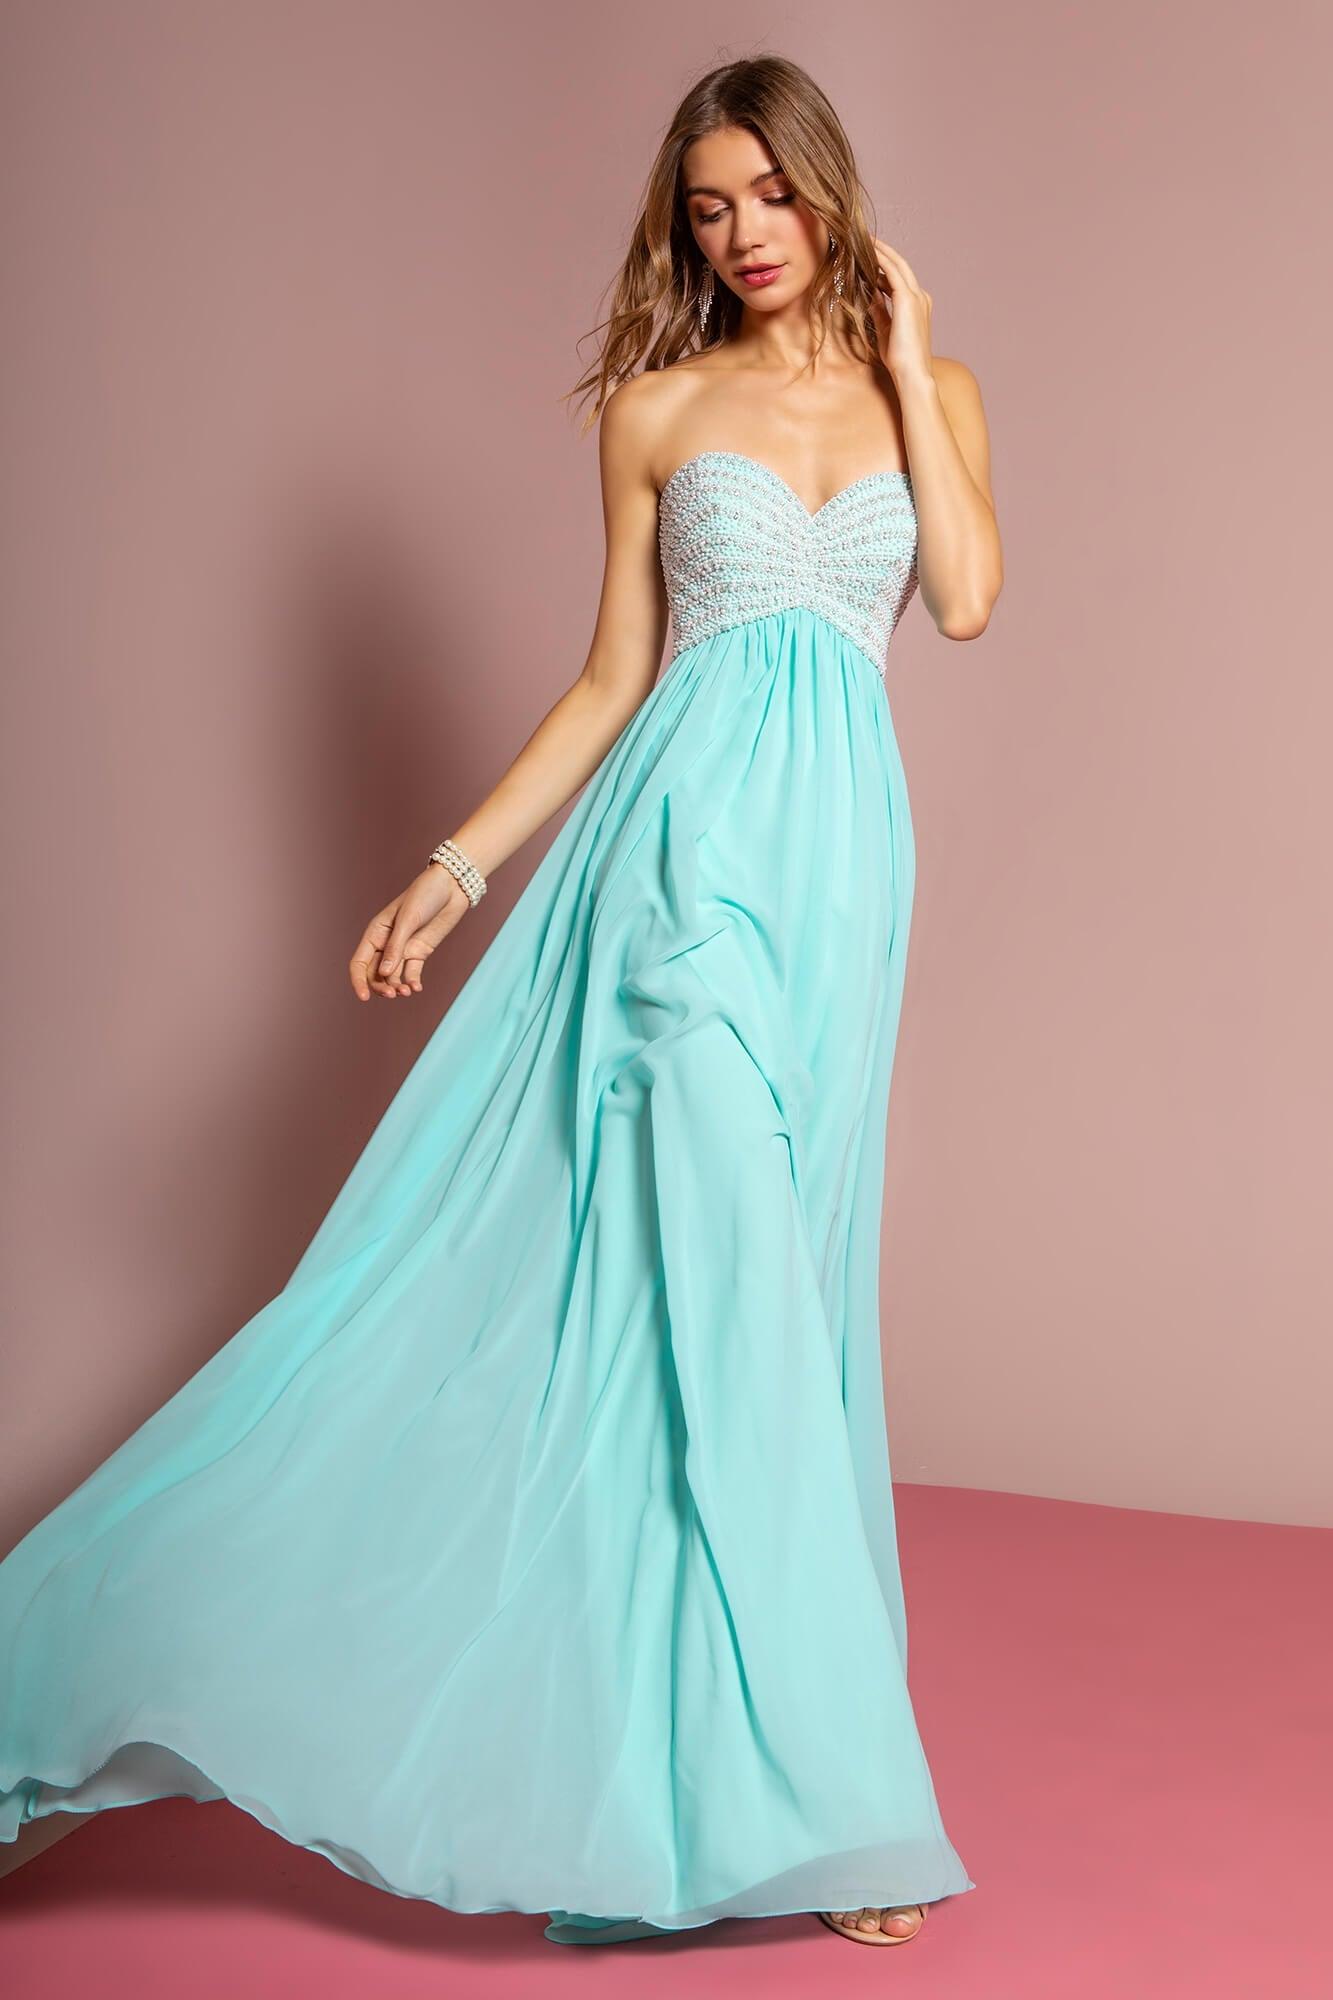 Strapless Long Prom Evening Gown - The Dress Outlet Elizabeth K